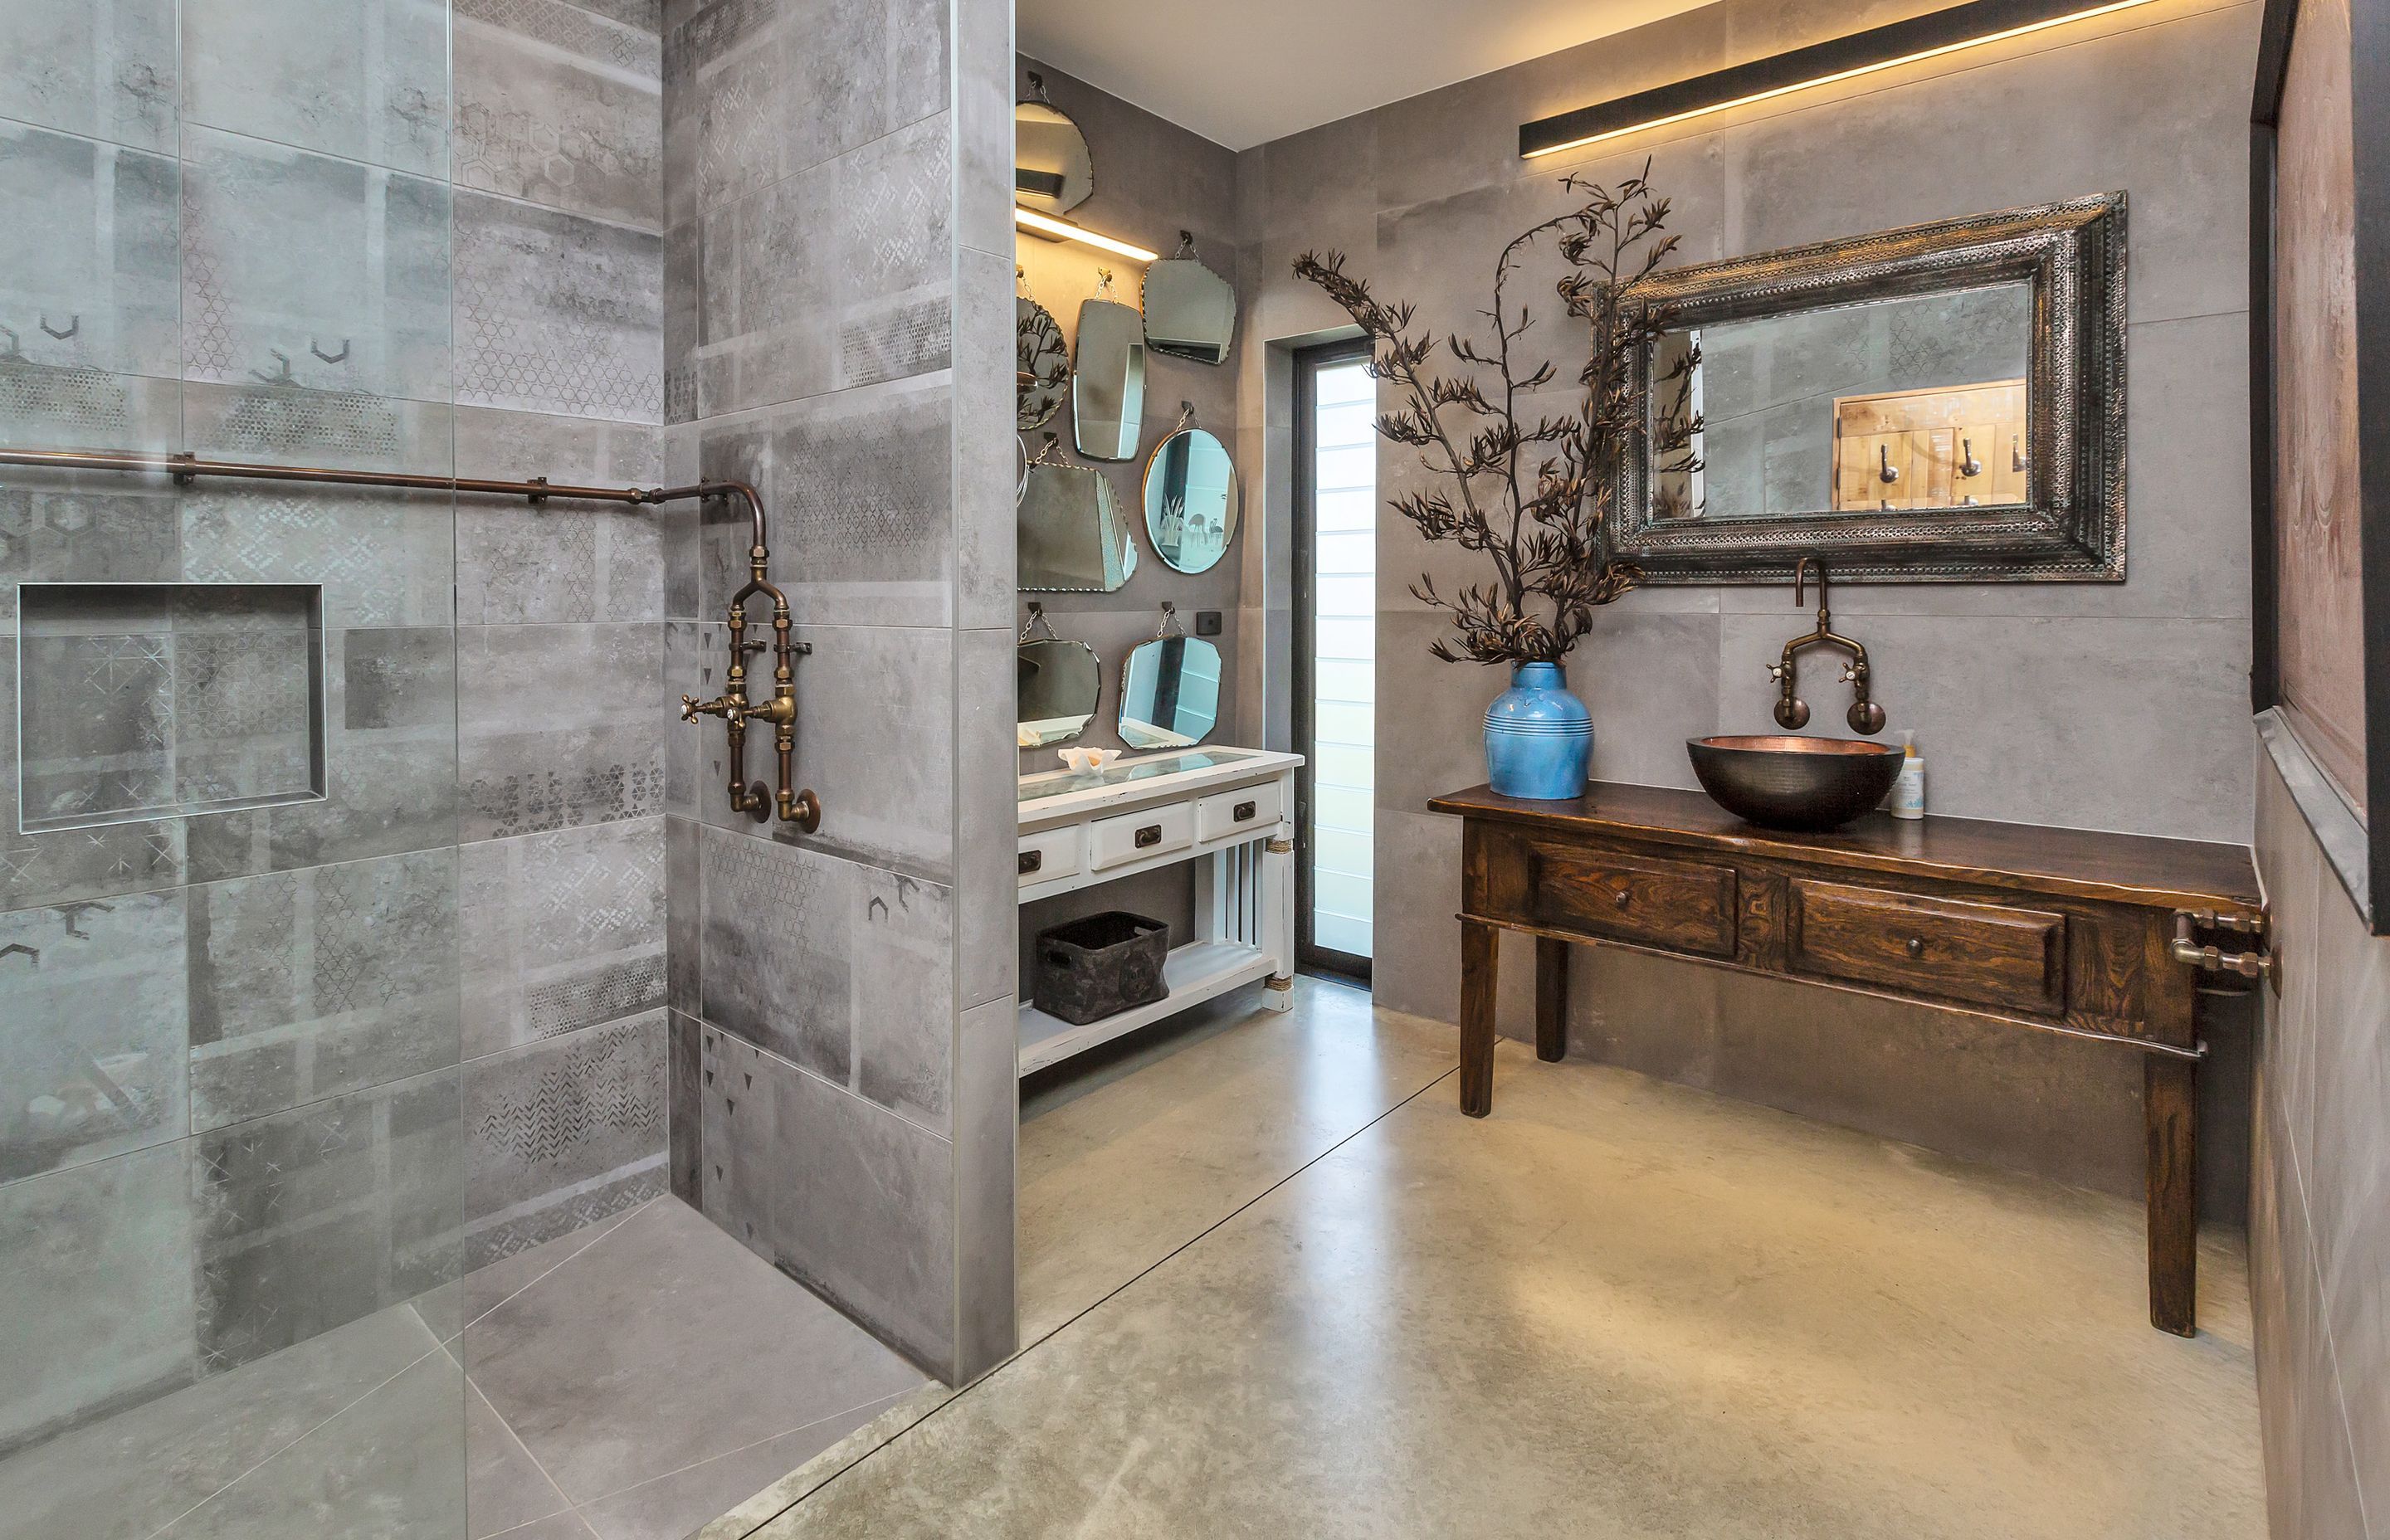 Antique and handcrafted cabinetry and mirrors are a feature n another of the bathrooms, along with recycled copper exposed pipework and tapware.